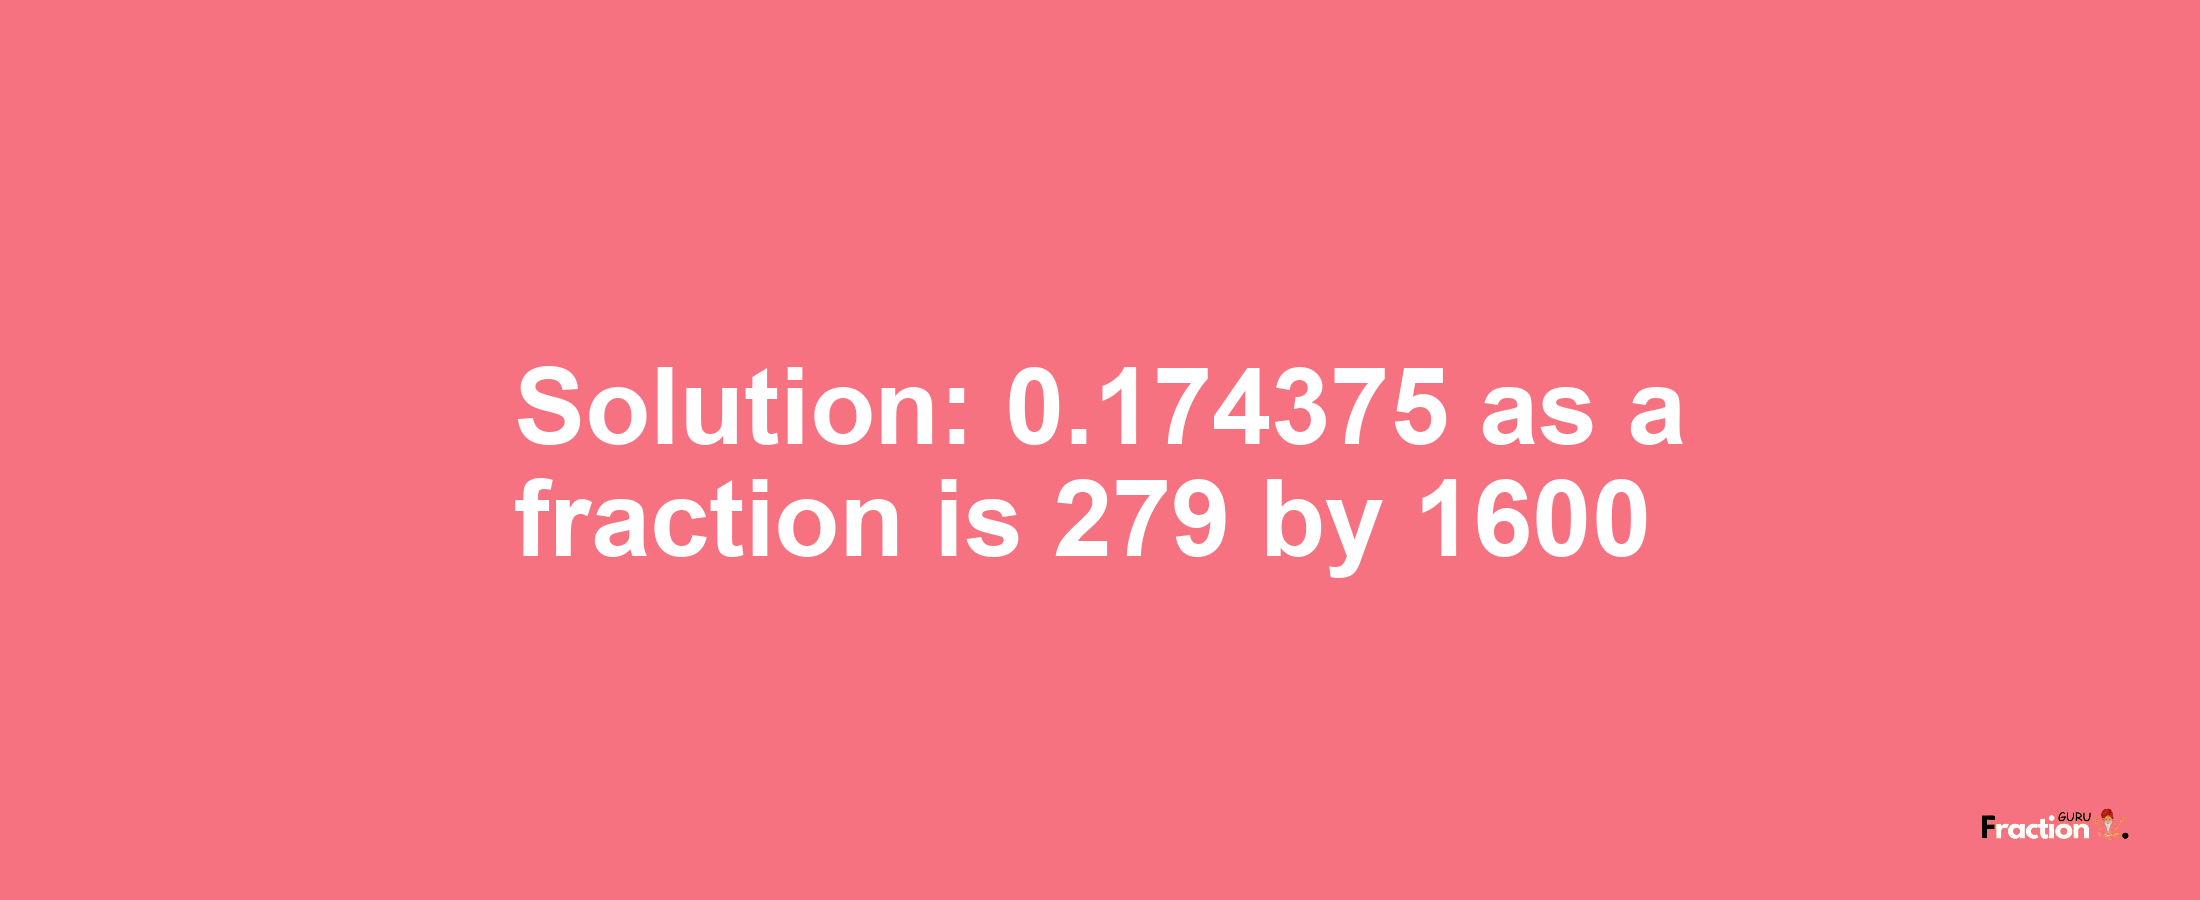 Solution:0.174375 as a fraction is 279/1600